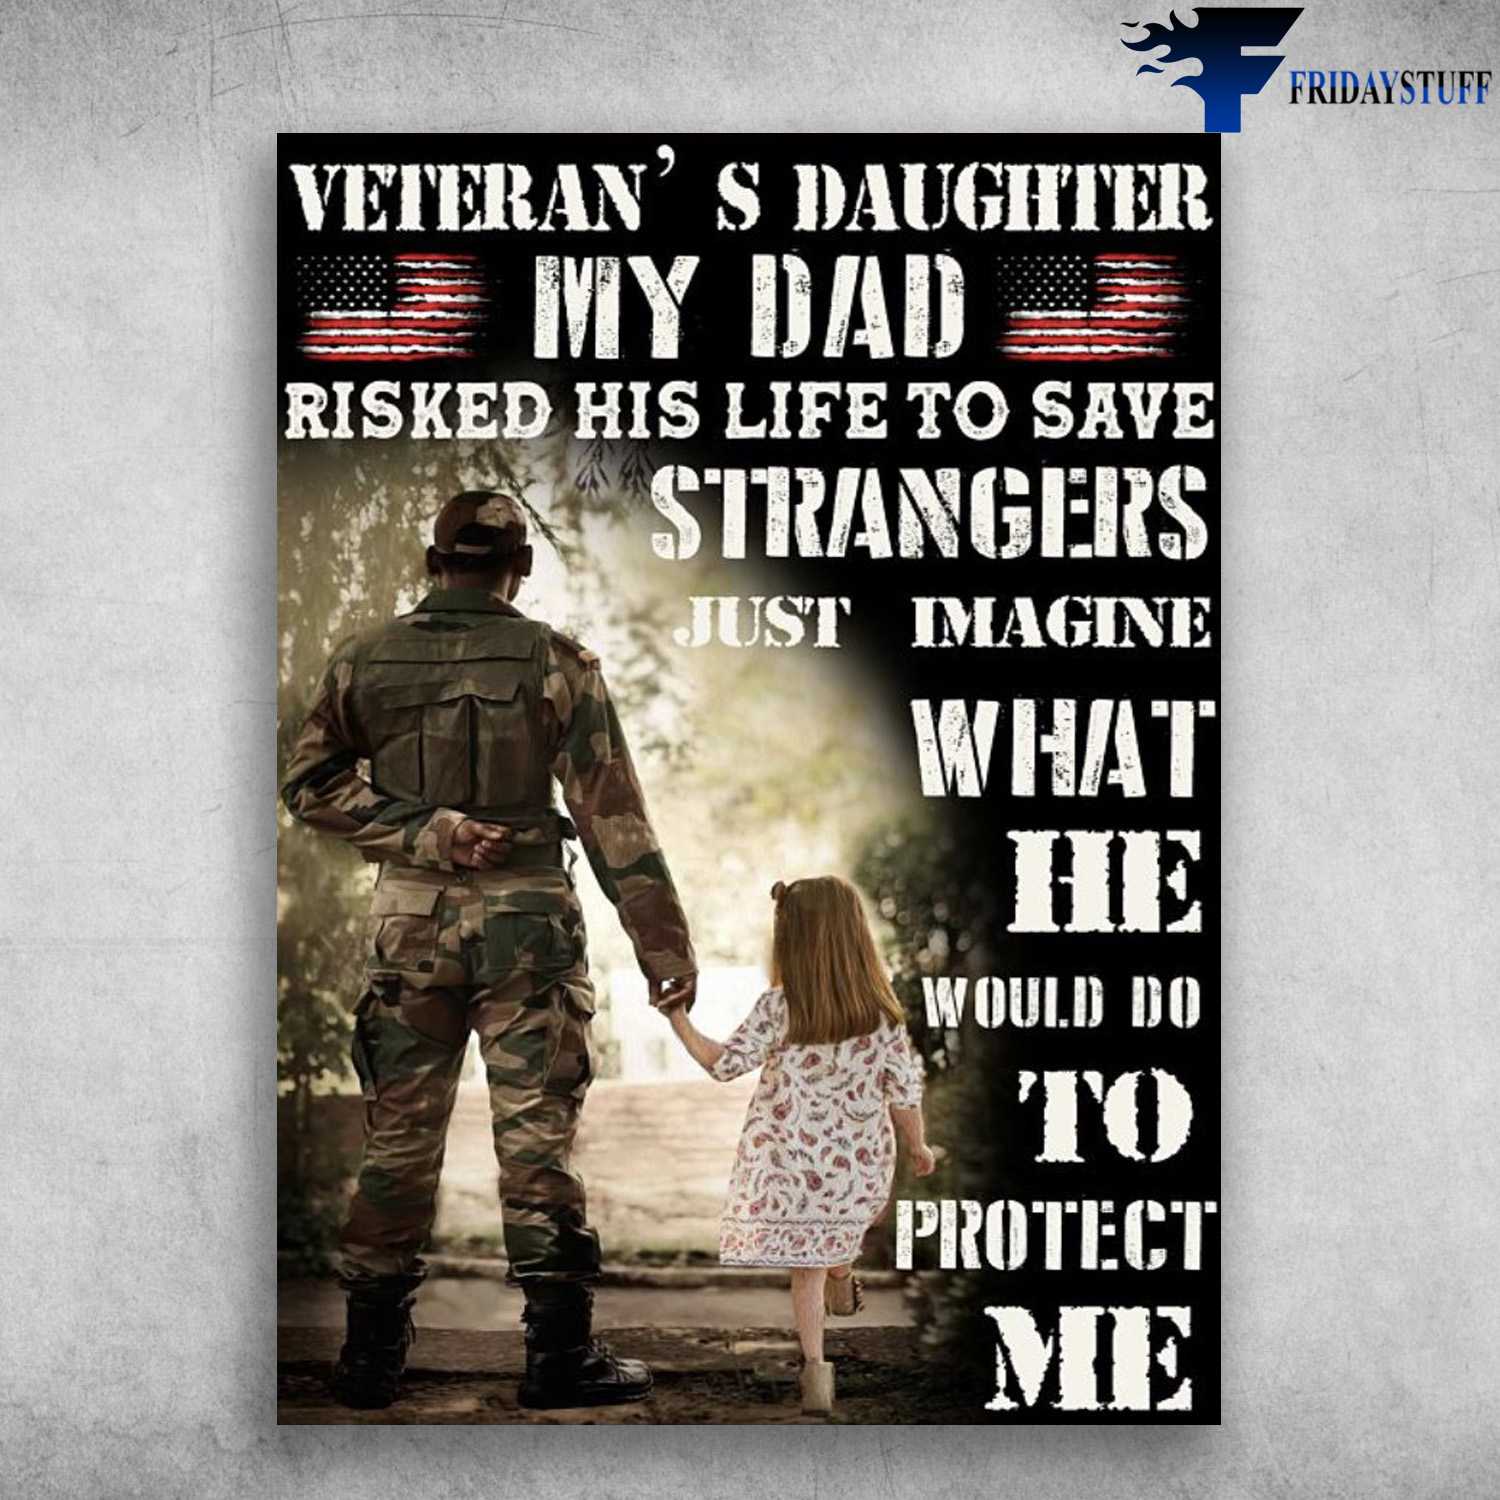 Dad And Daughter, American Veteran - Veteran's Daughter, My Dad, Risked His Life To Save, Strangers, Just Imagine, What He Would Do To Protect Me